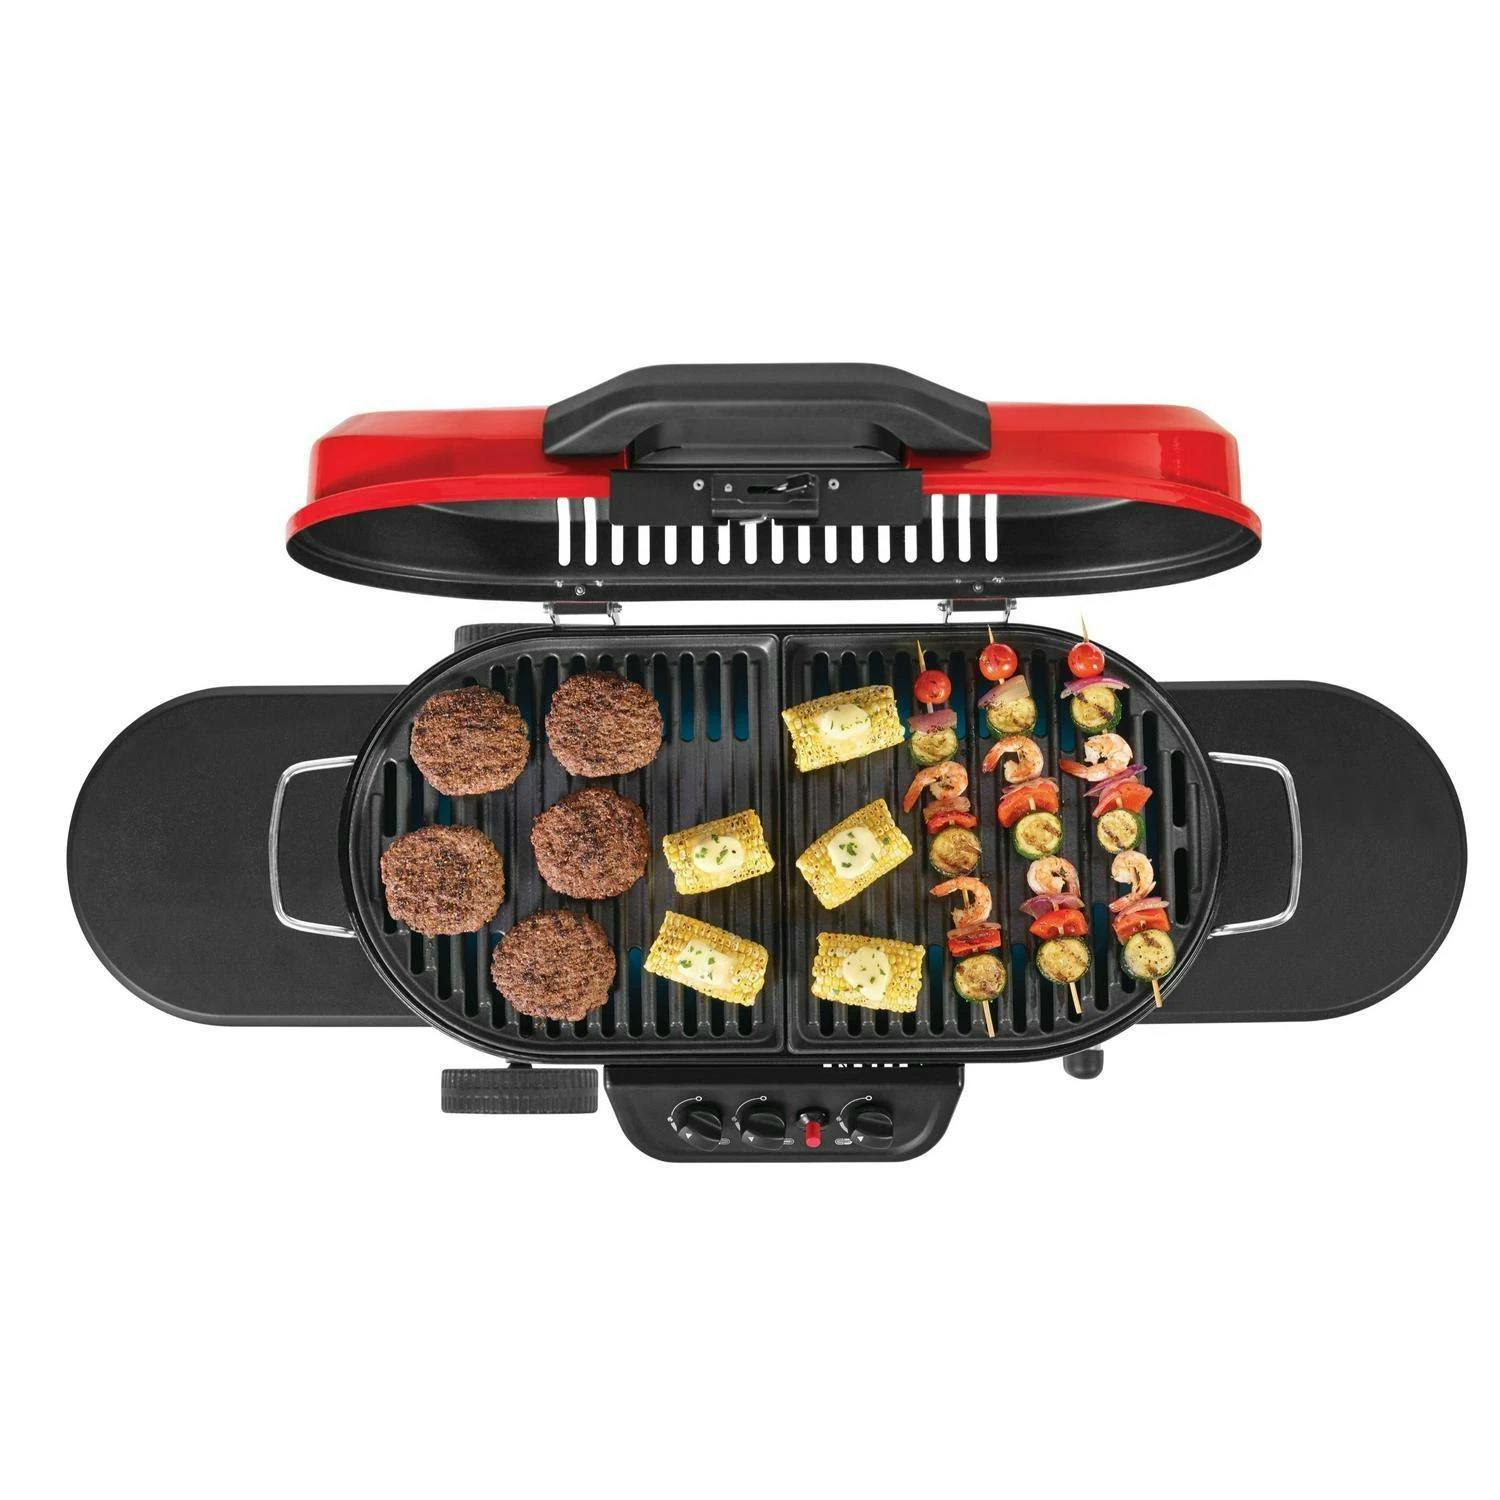 Coleman Roadtrip 225 Portable Stand Up Propane Grill Black